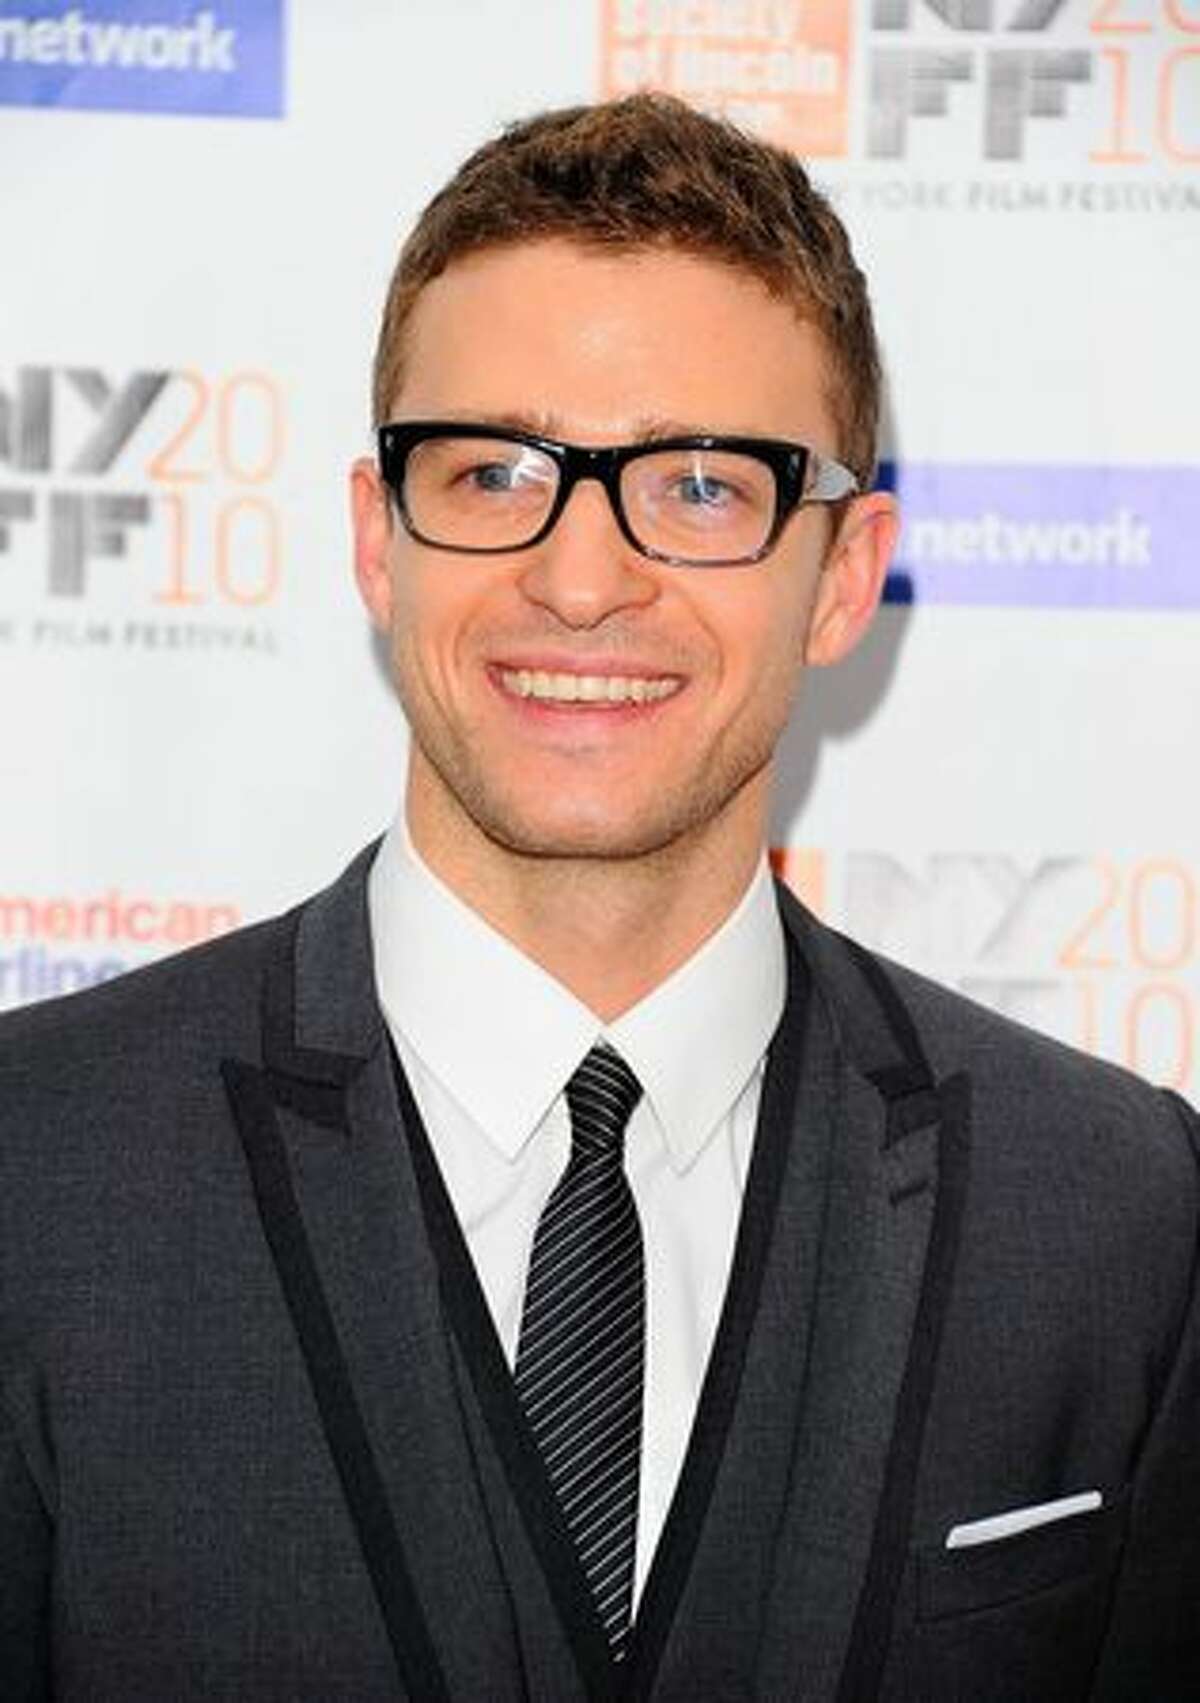 Justin Timberlake attends the premiere of "The Social Network" during the 48th New York Film Festival at Alice Tully Hall, Lincoln Center in New York City.